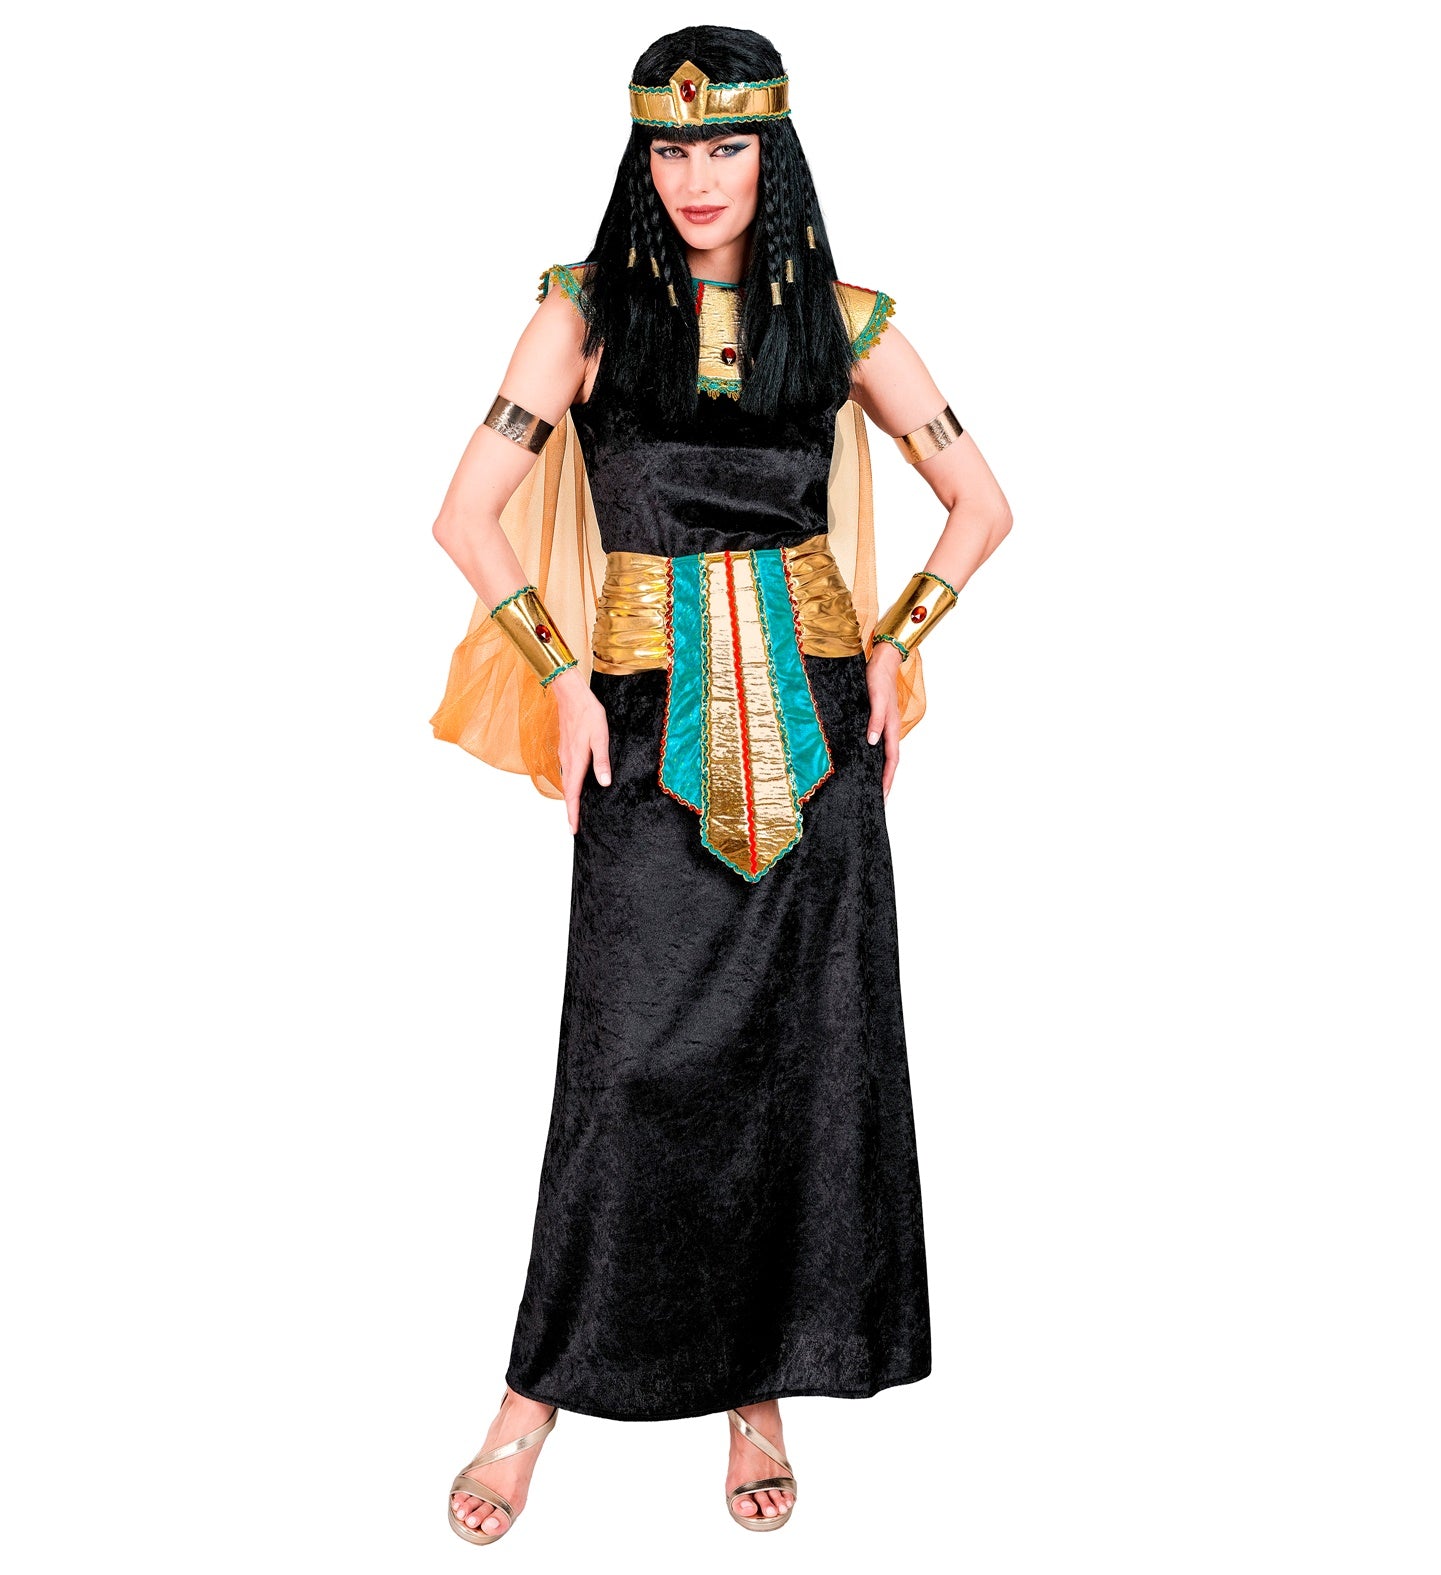 Egyptian Queen Cleopatra dress outfit Adult